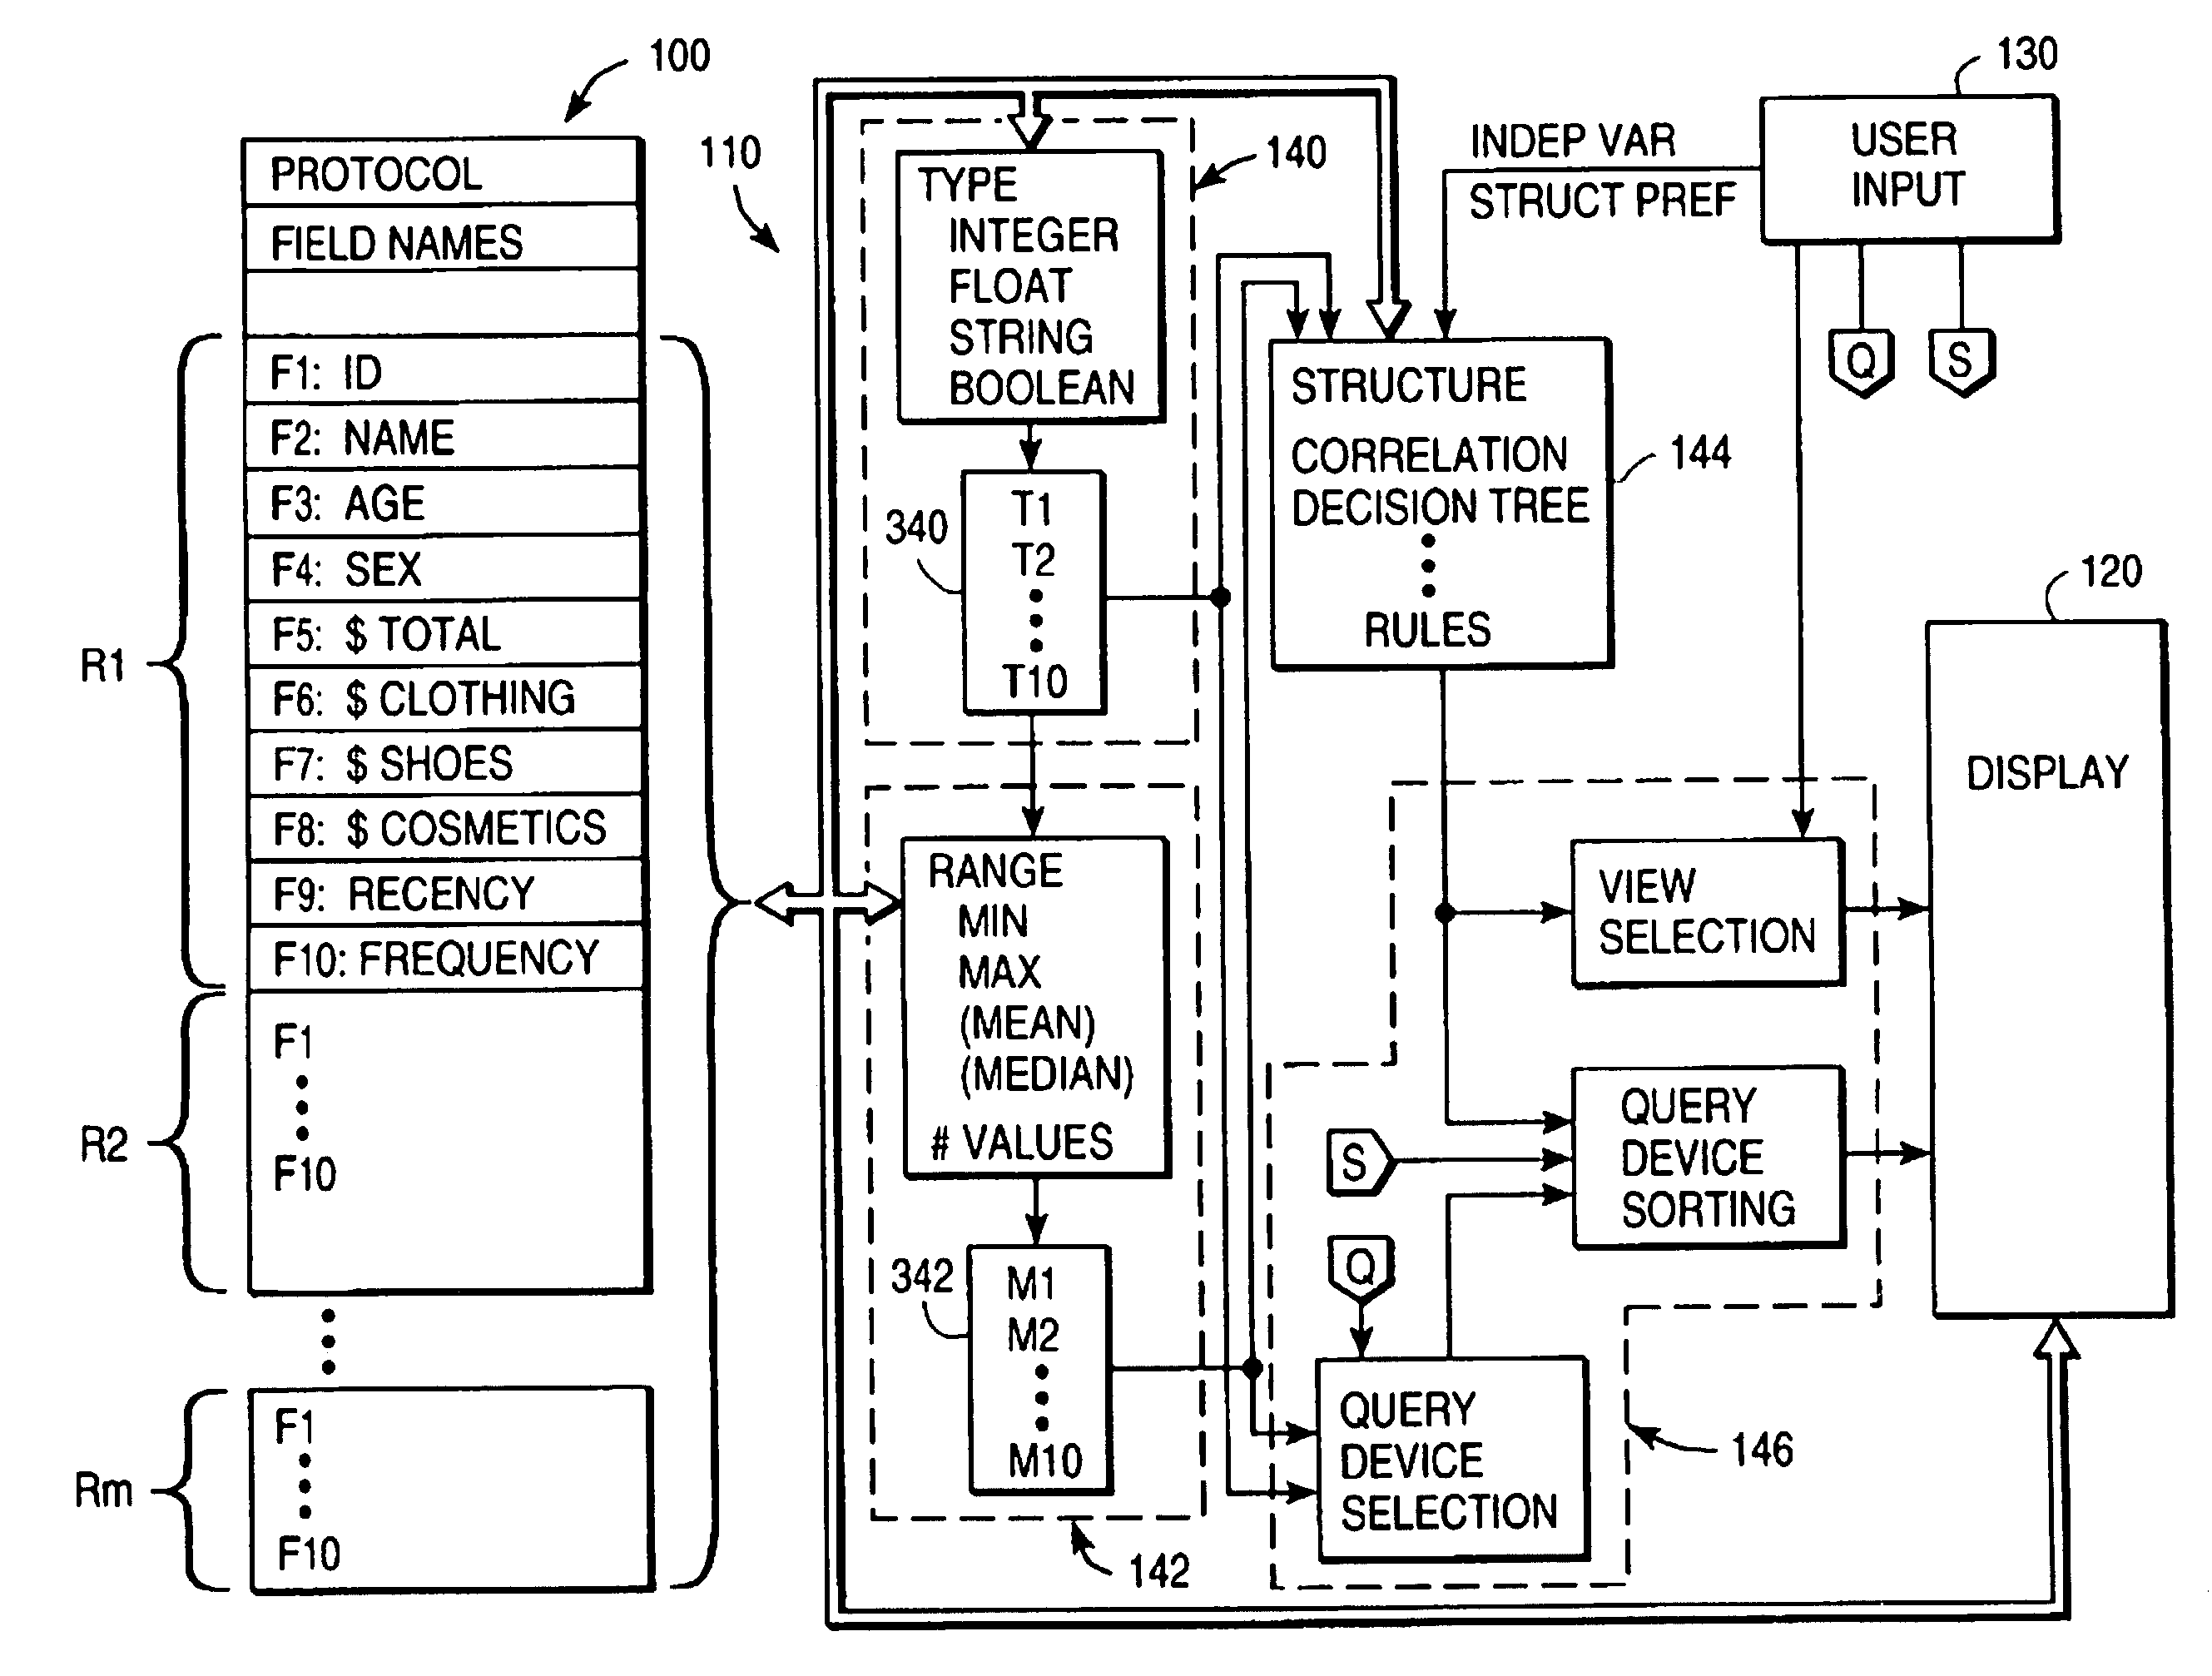 Data analysis system with automated query and visualization environment setup